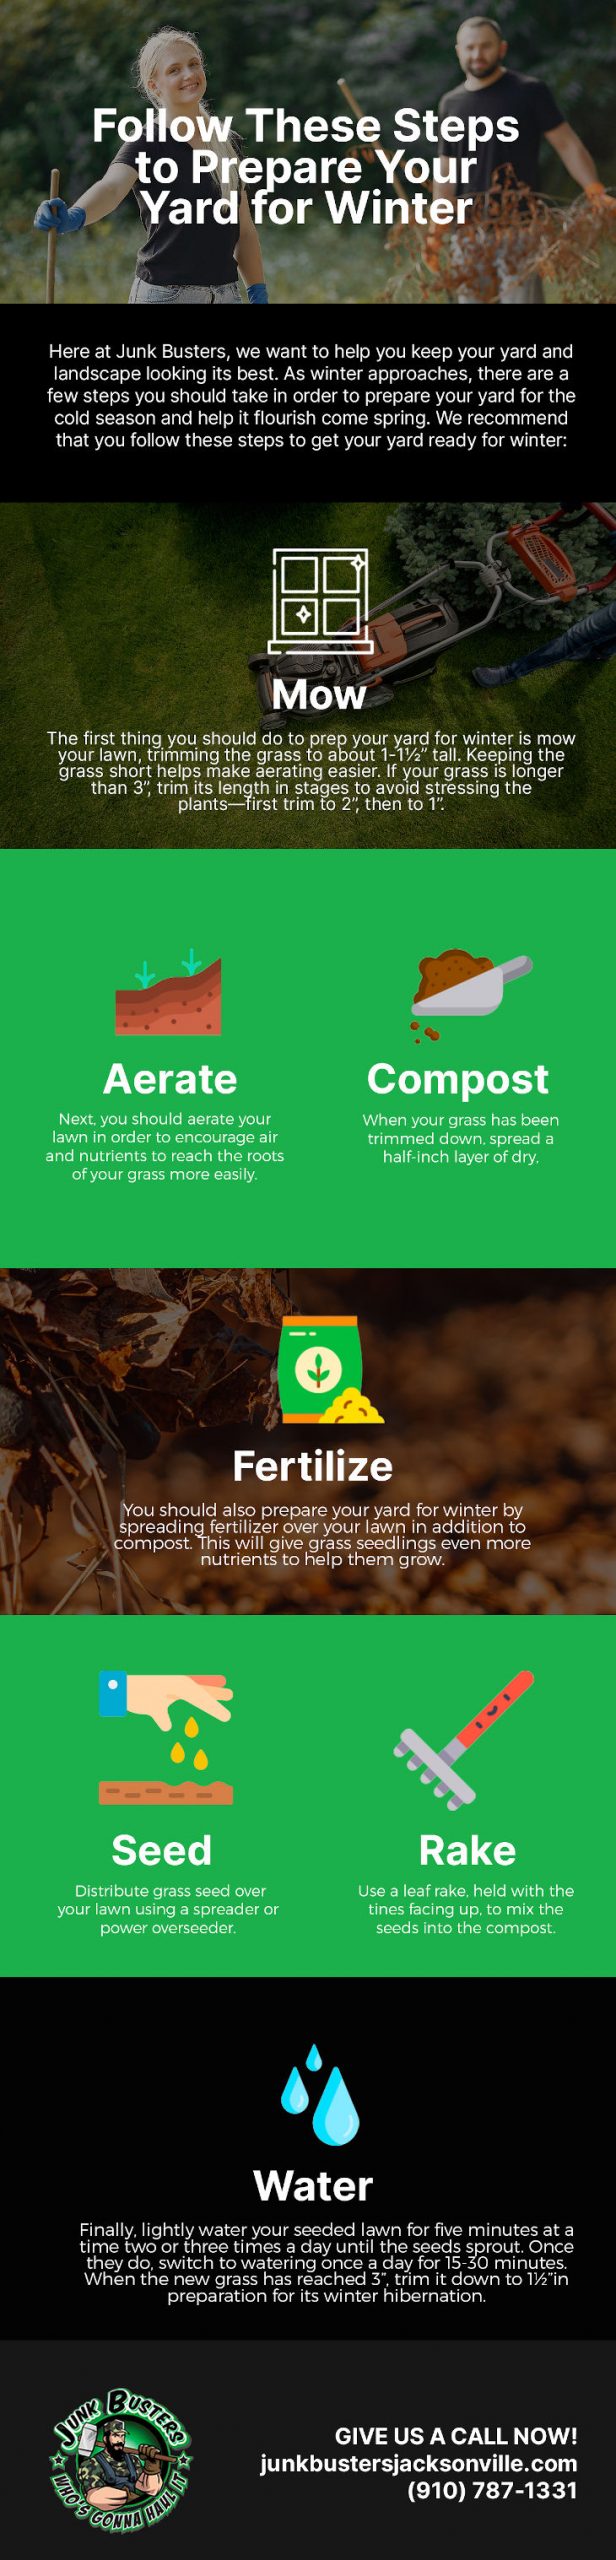 Follow These Steps to Prepare Your Yard for Winter [infographic]